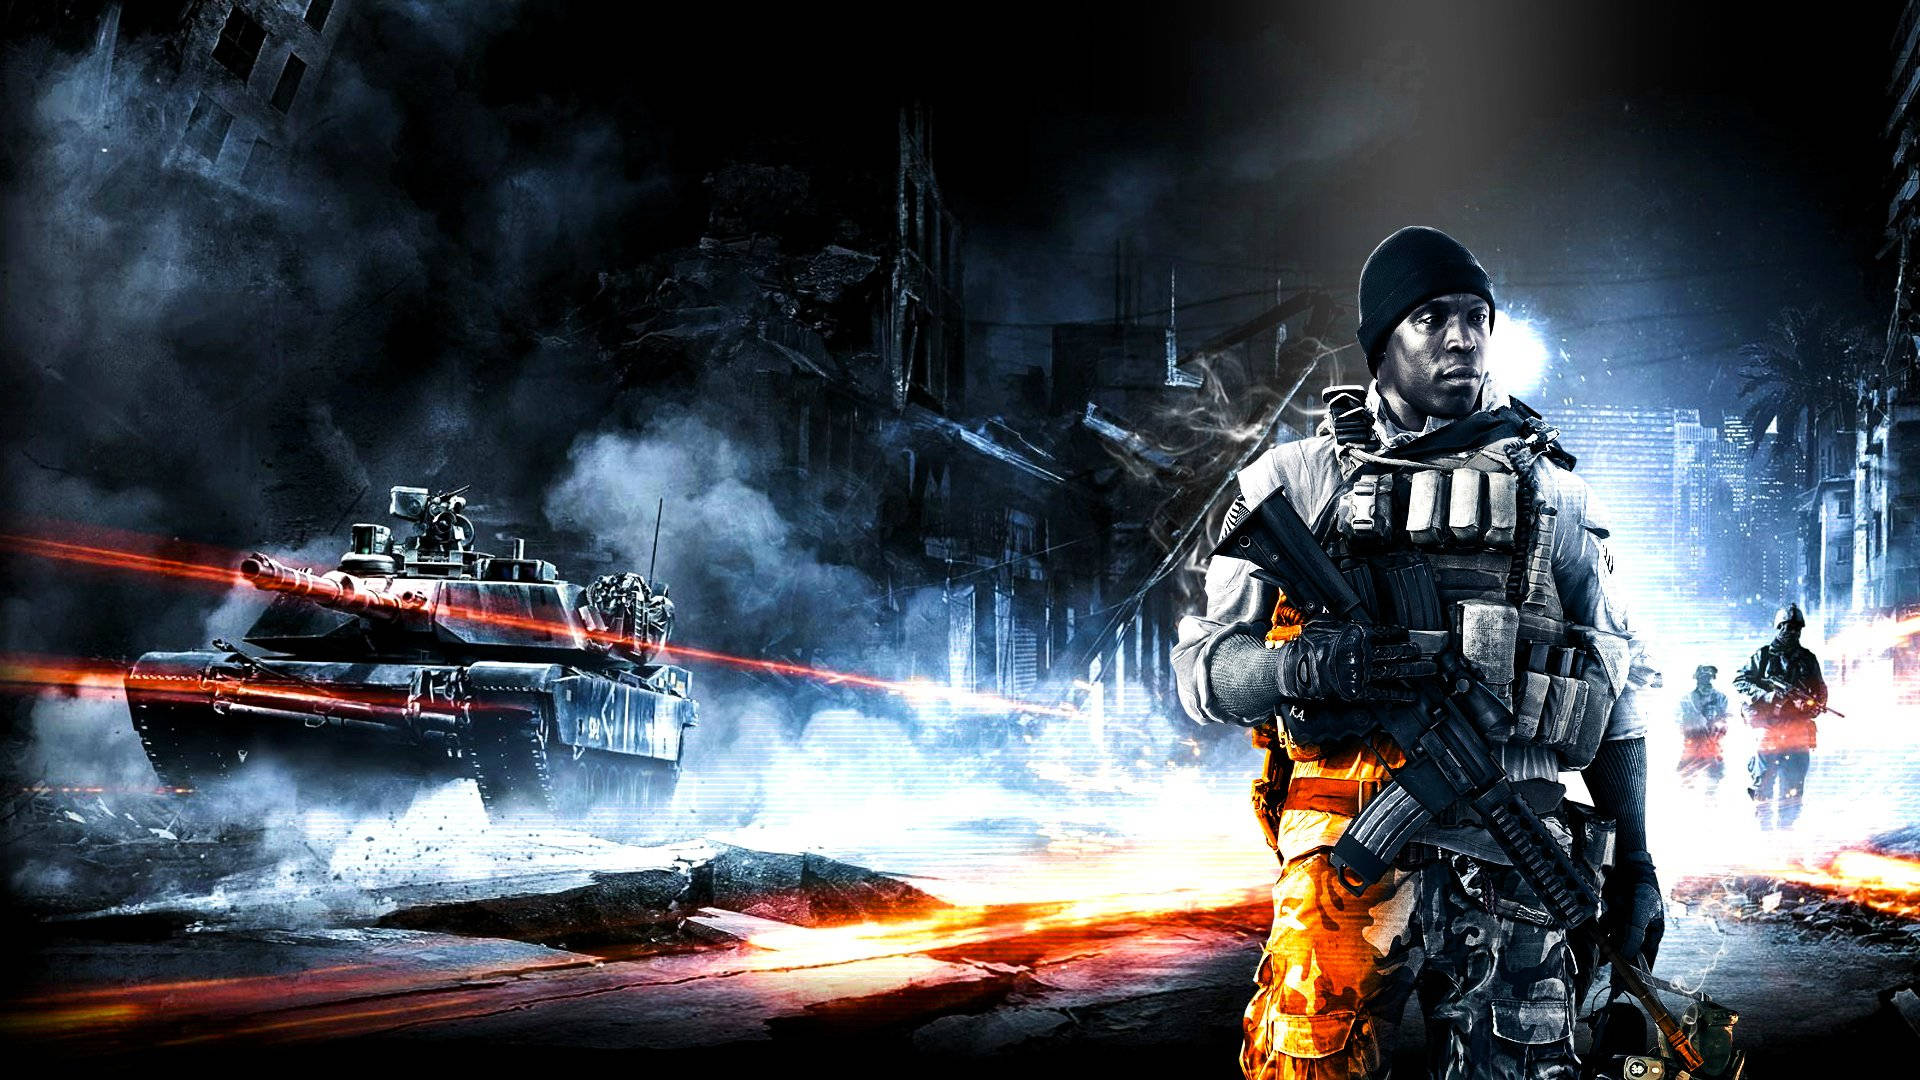 1080x1920 Battlefield 3 Wallpapers for Android Mobile Smartphone [Full HD]